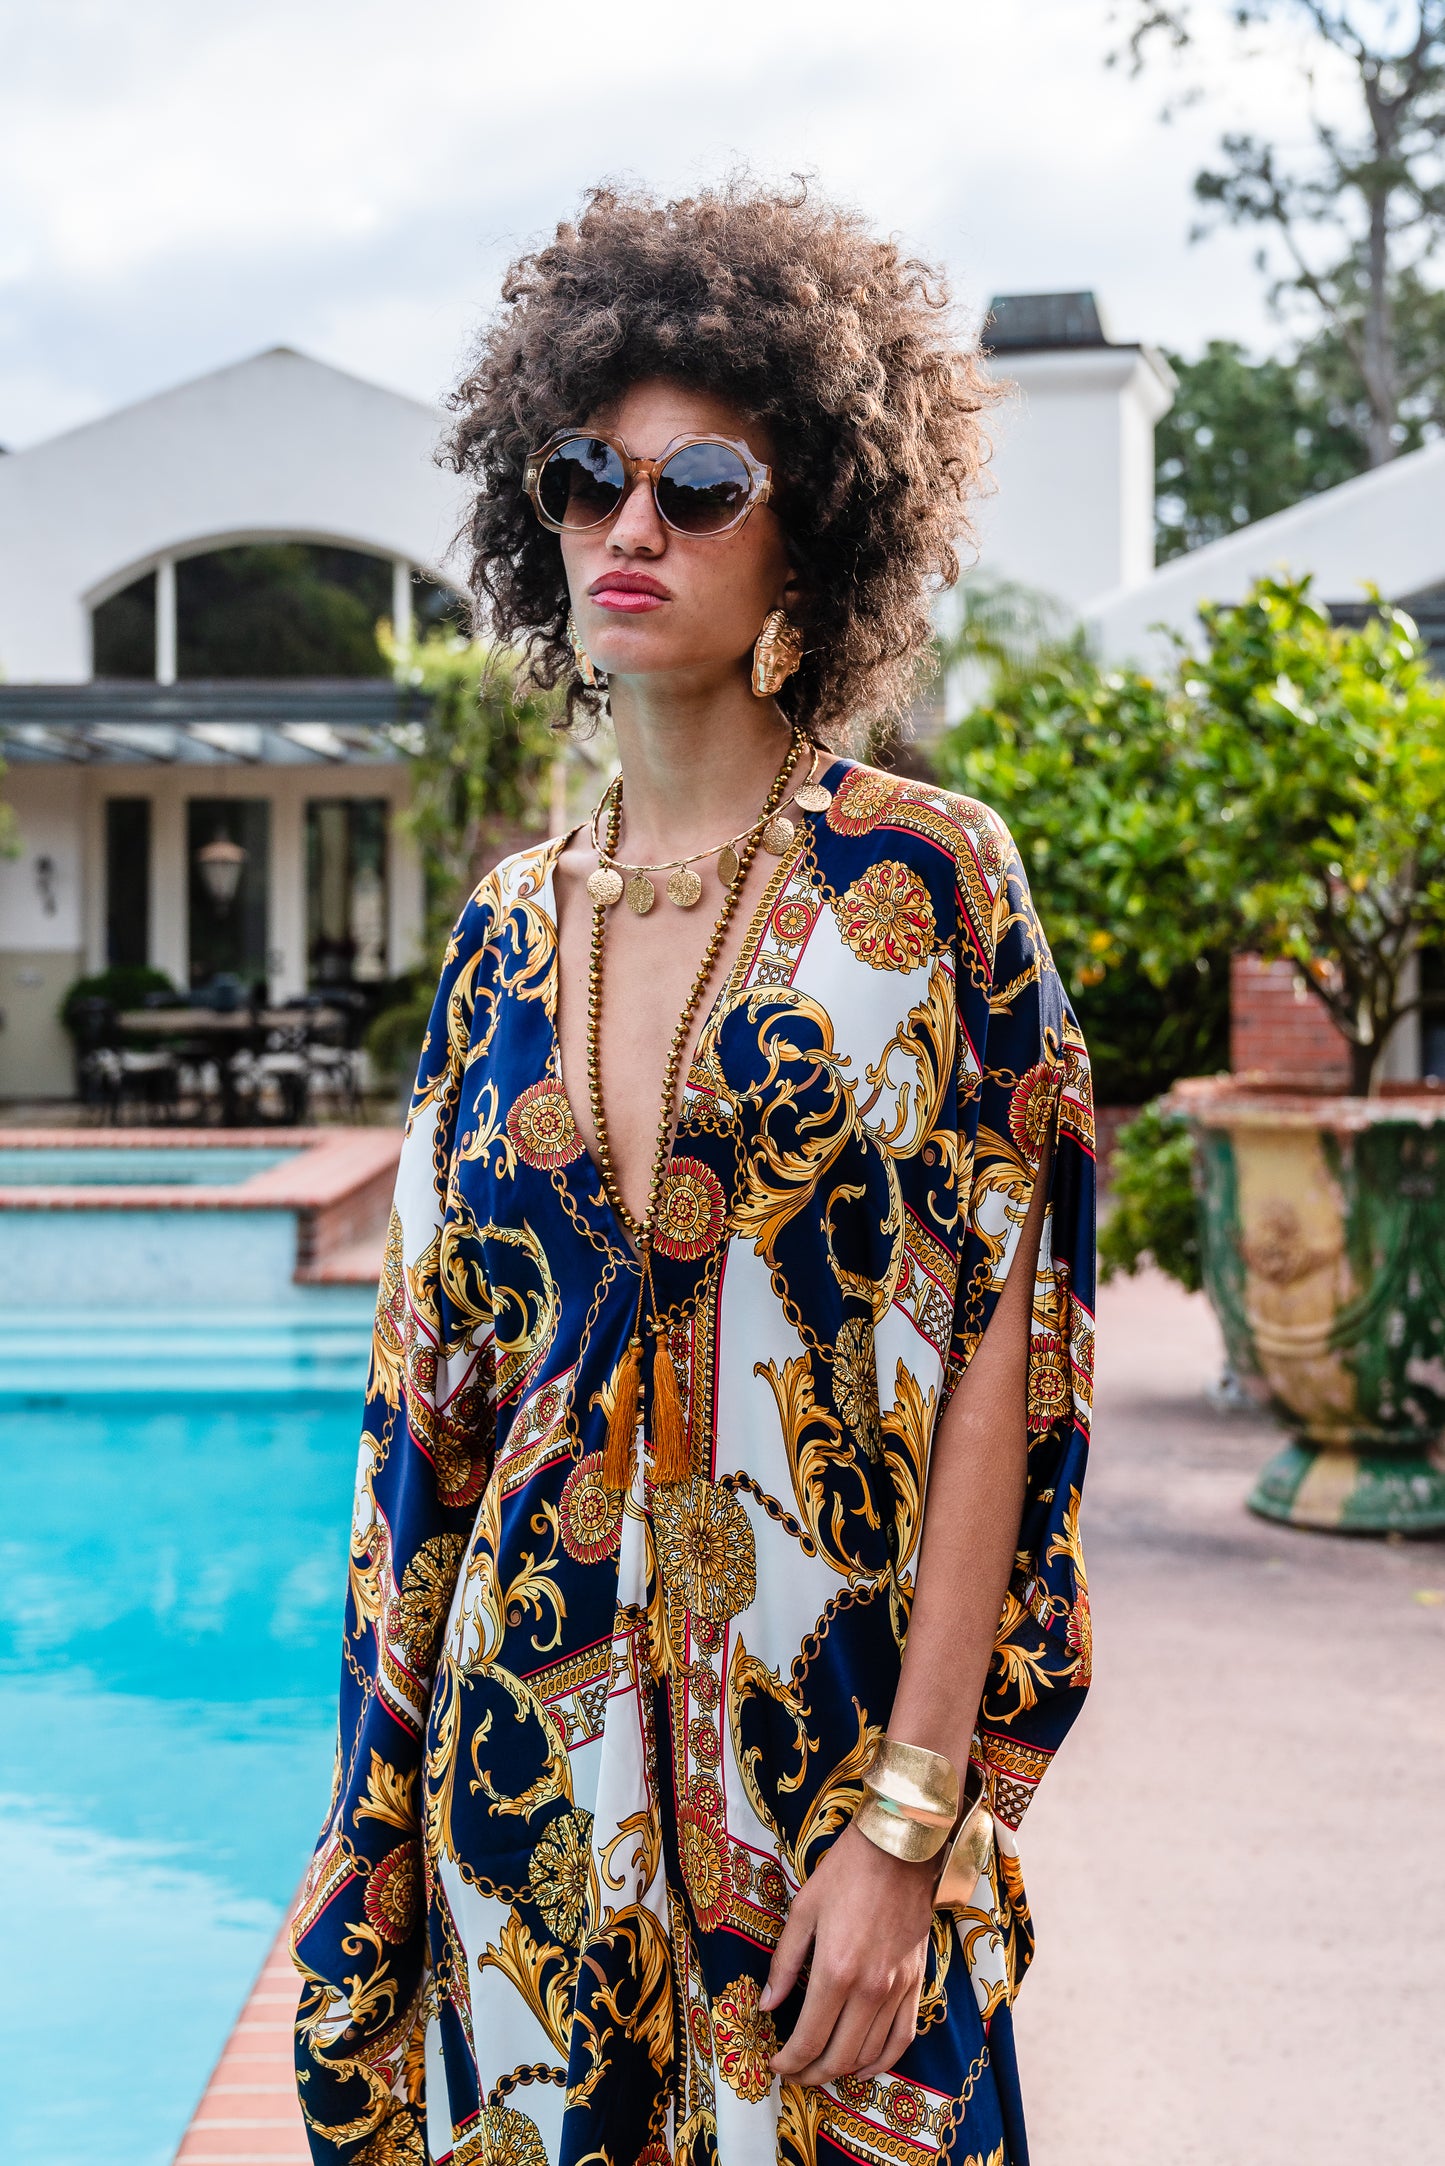 Jennafer Grace Voglia Nautica Caftan. Featuring a rococo baroque print with blocks of navy blue and white with golden and red accents. Featuring a deep v-neck, batwing sleeves, and an ankle length hem.